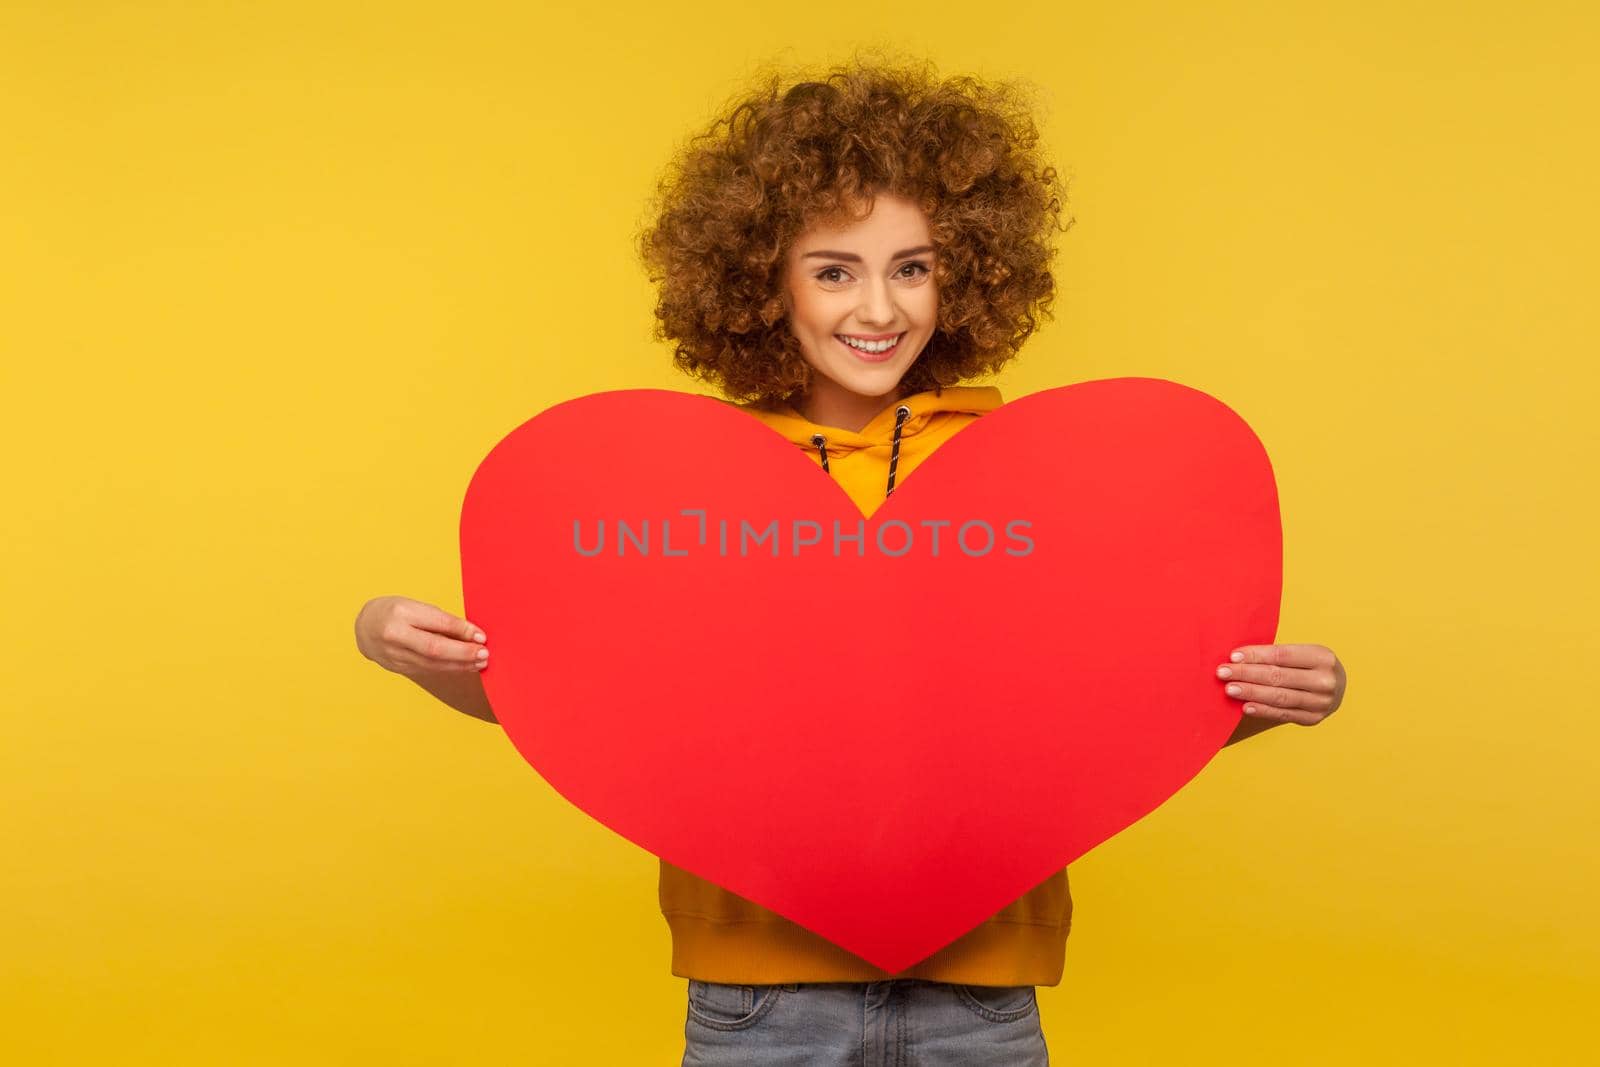 Charming lively energetic woman with fluffy curly hair holding big heart love symbol, looking at camera with toothy smile, romance on Valentine's day. indoor studio shot isolated on yellow background